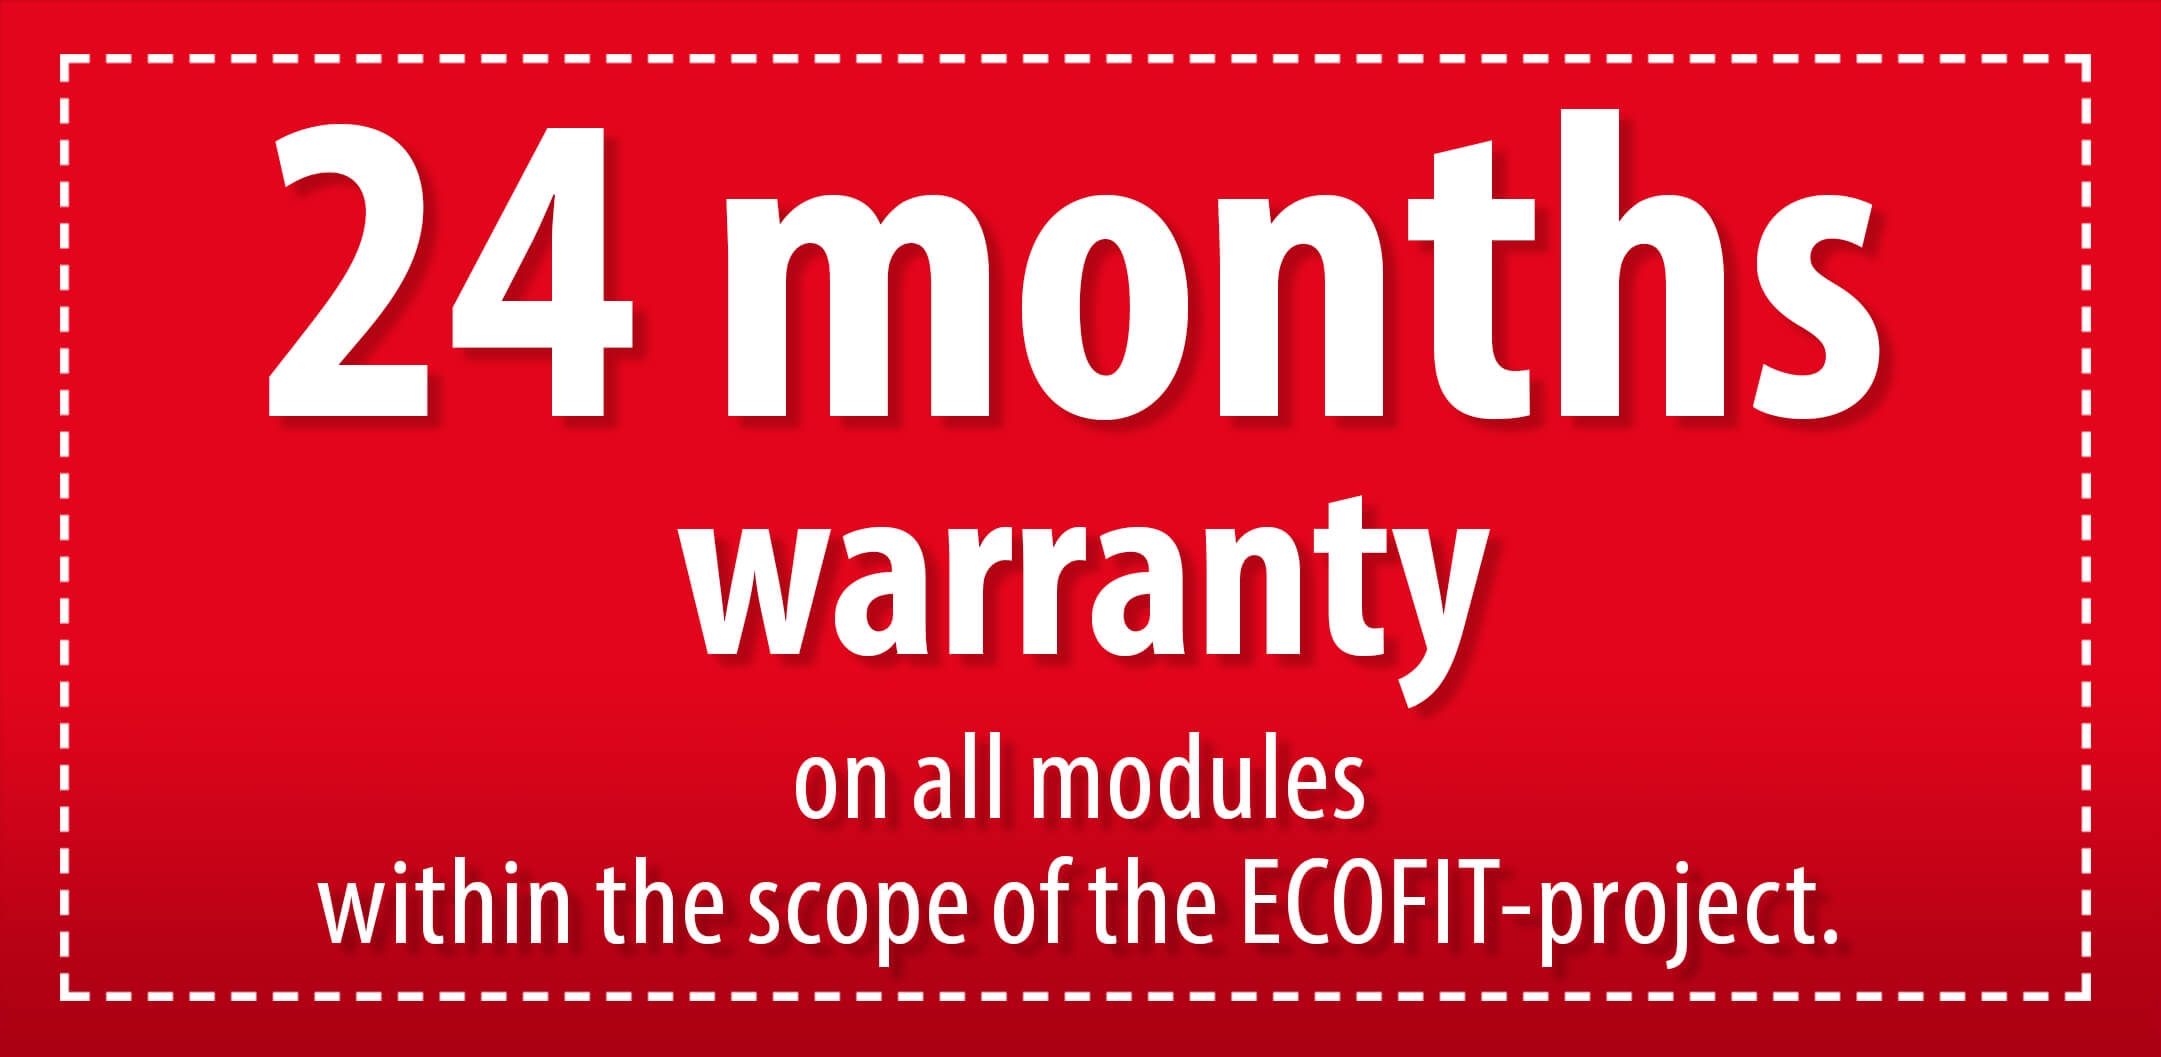 24 months warranty on all modules within the scope of the ECOFIT project - BVS Industrie-Elektronik